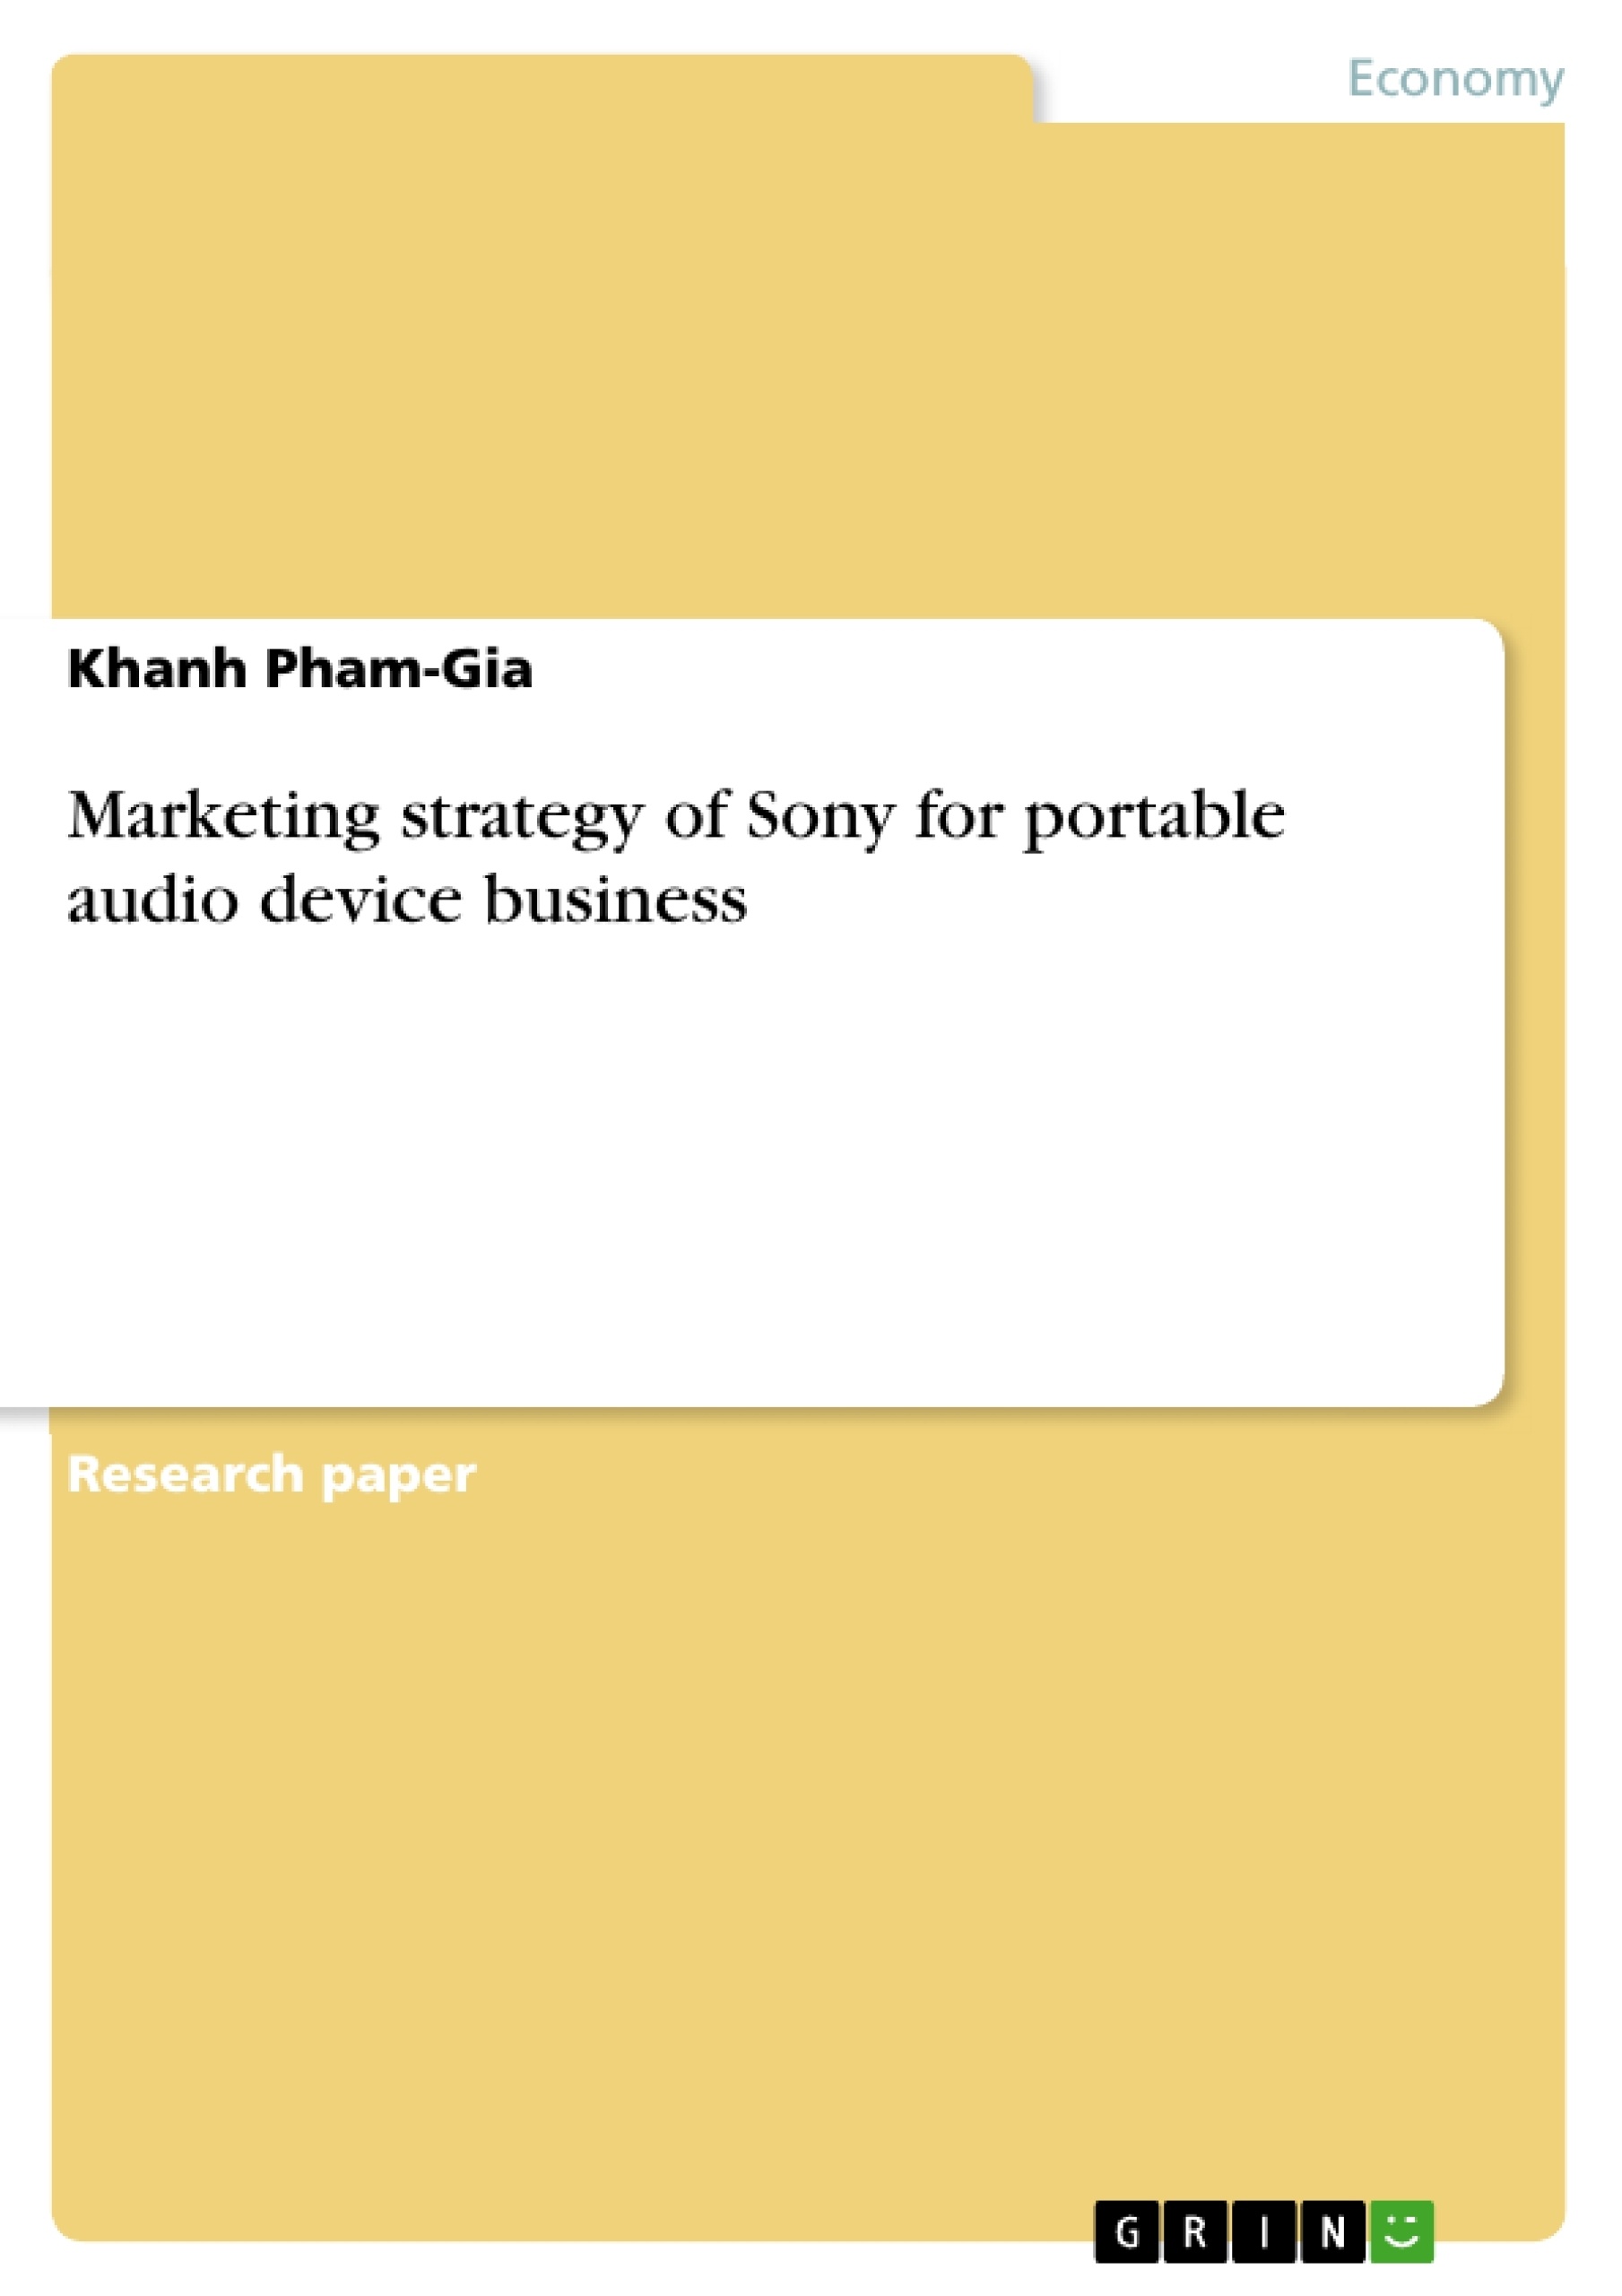 Title: Marketing strategy of Sony for portable audio device business